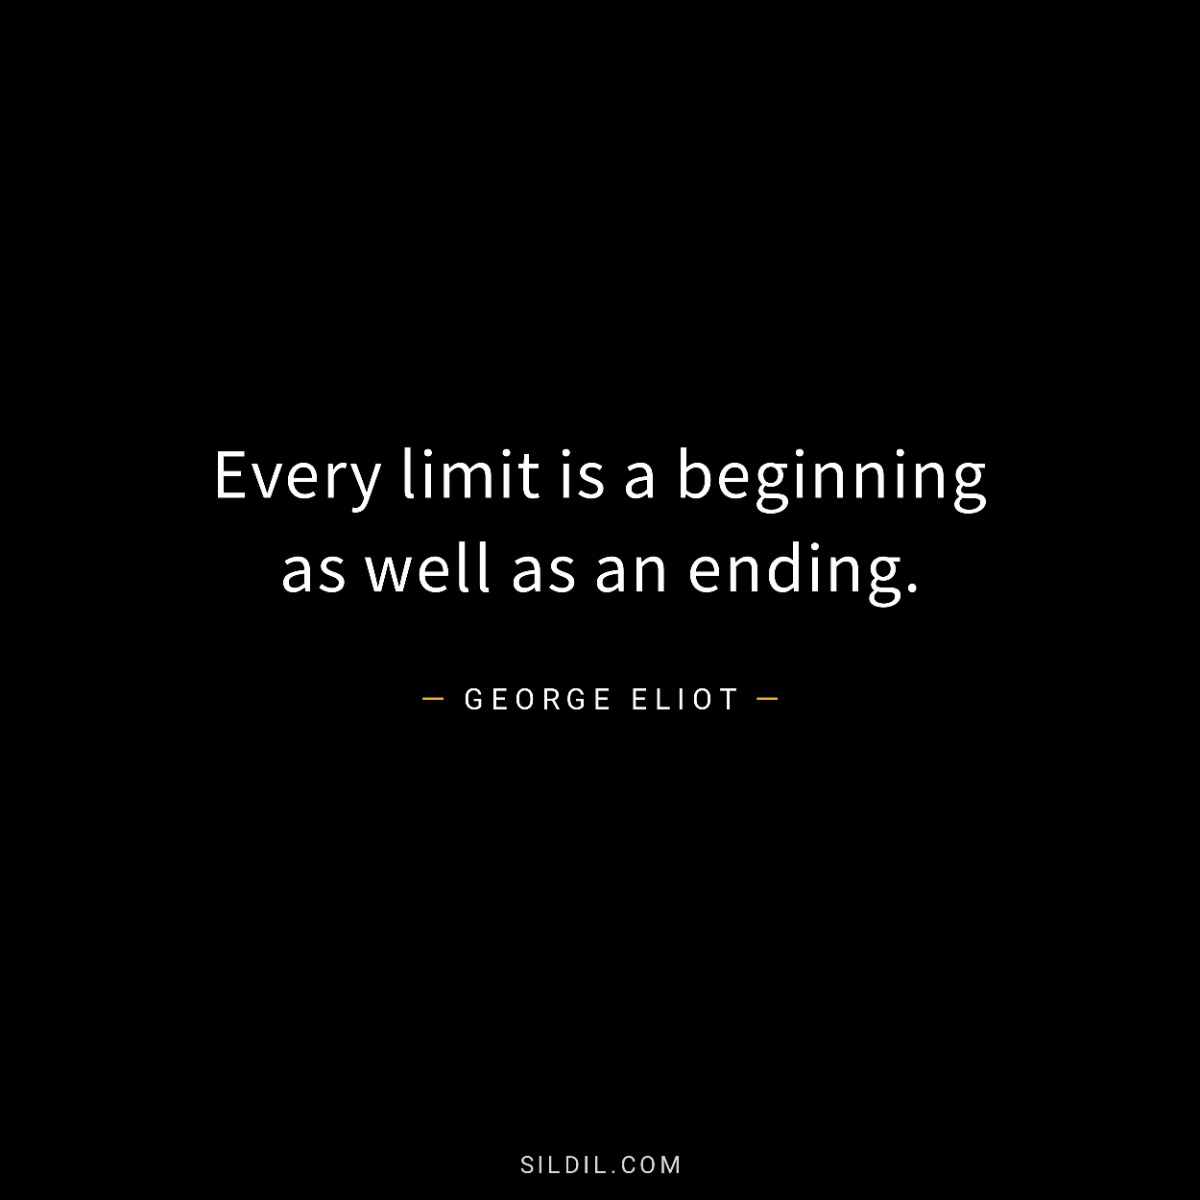 Every limit is a beginning as well as an ending.